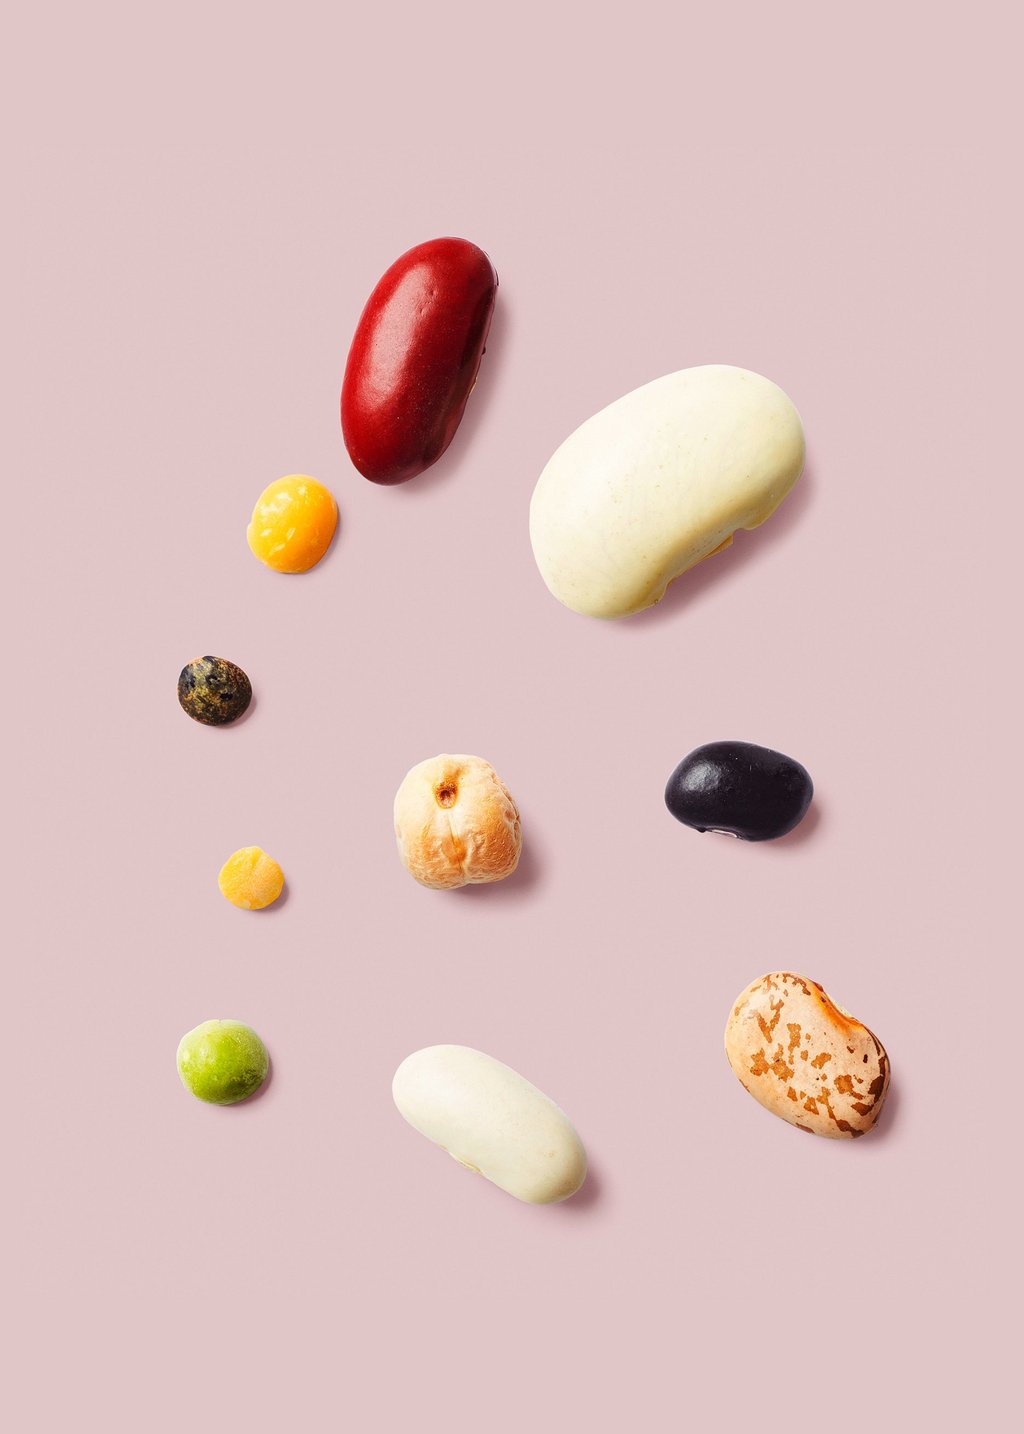 Photo of individual seeds of different legumes on a rose-colored background.